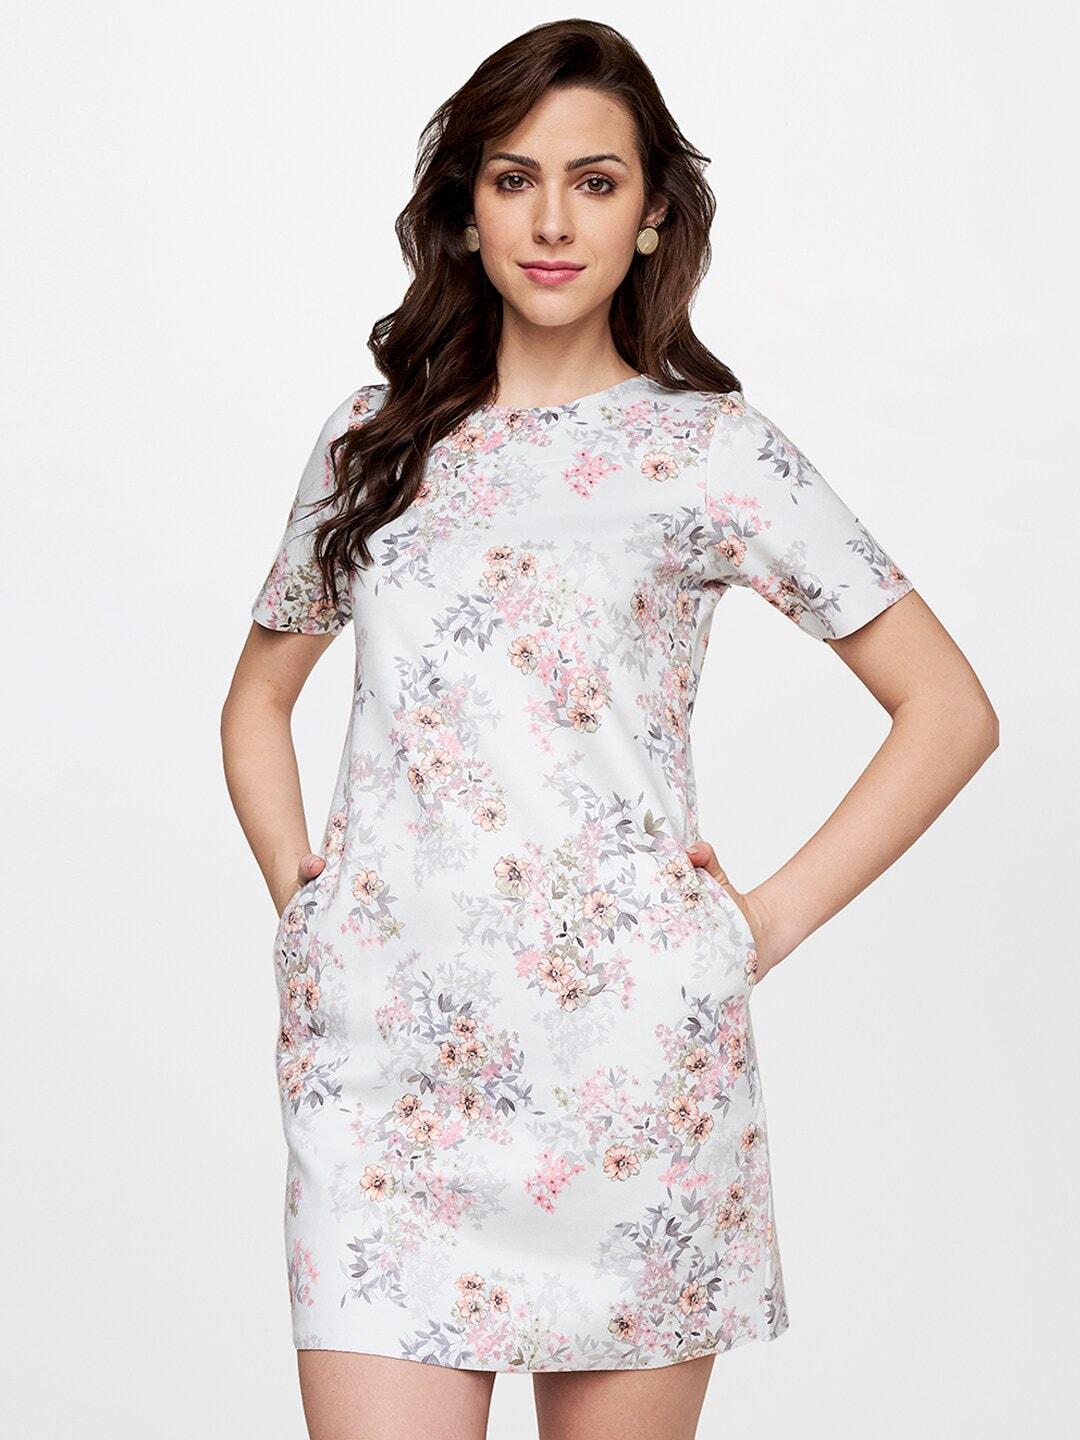 and-off-women-white-&-pink-floral-sheath-dress